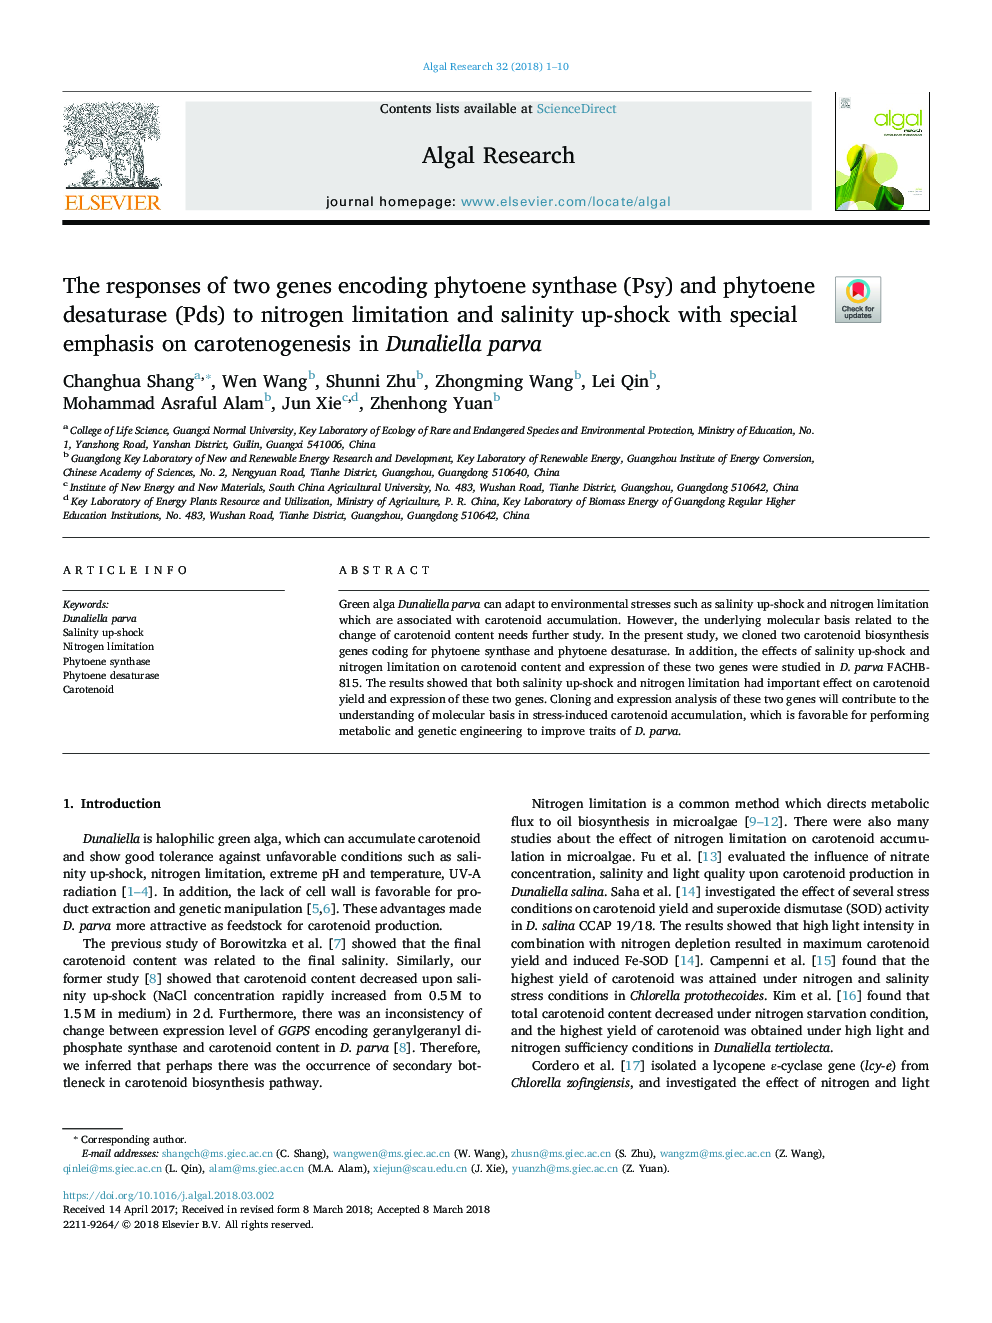 The responses of two genes encoding phytoene synthase (Psy) and phytoene desaturase (Pds) to nitrogen limitation and salinity up-shock with special emphasis on carotenogenesis in Dunaliella parva